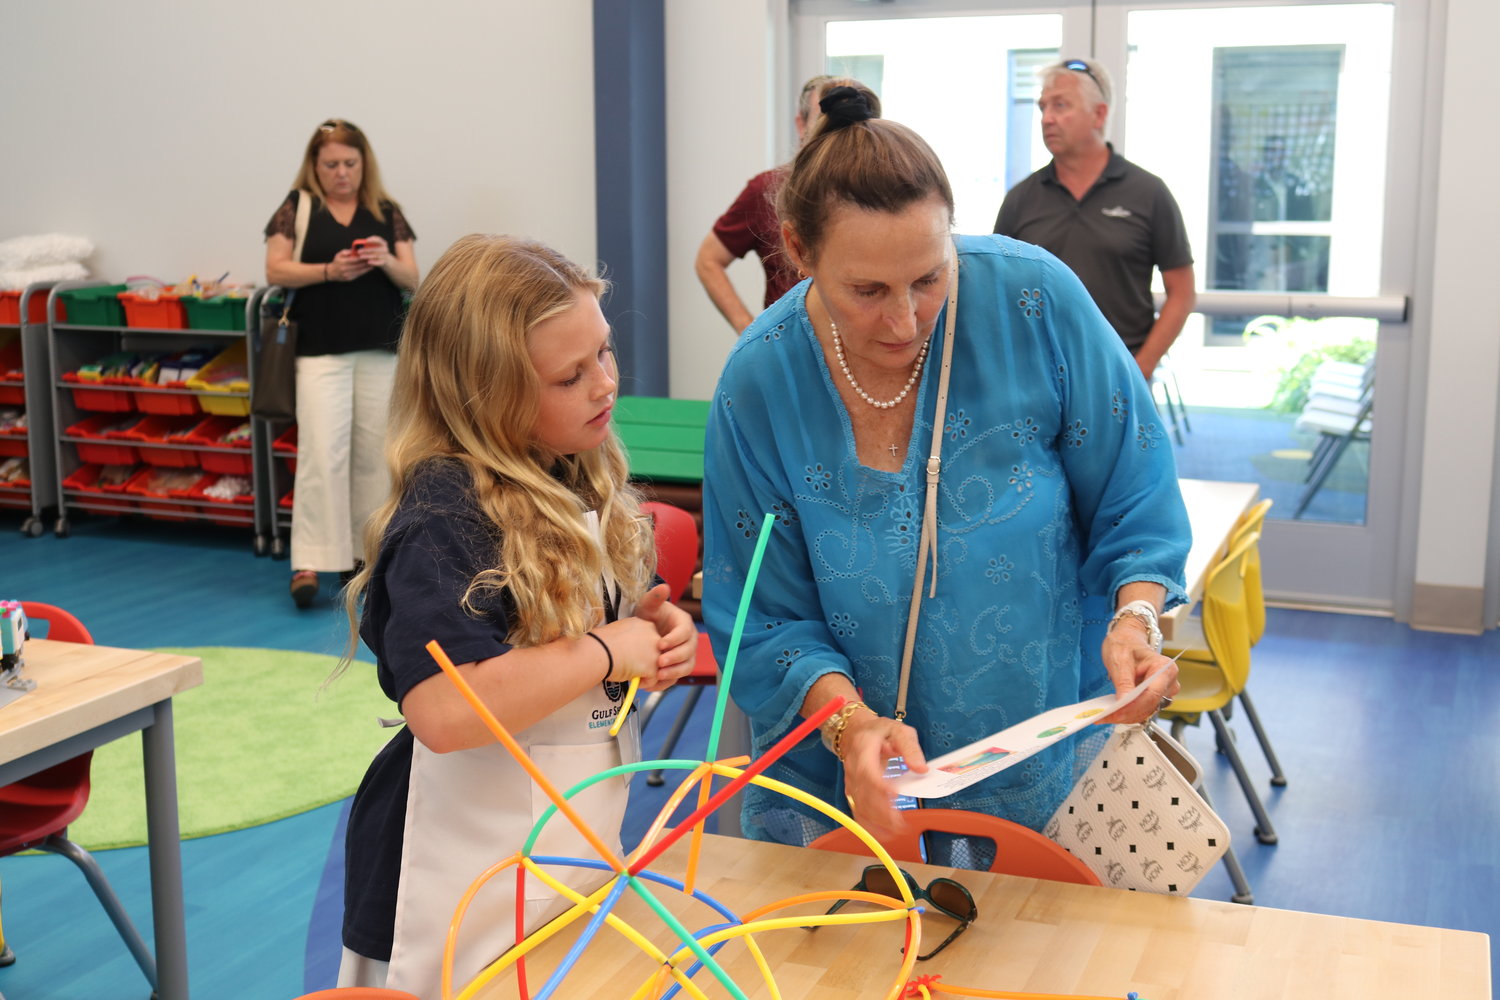 Gulf Shores Elementary students showed off their STEAM skills during an open house event.